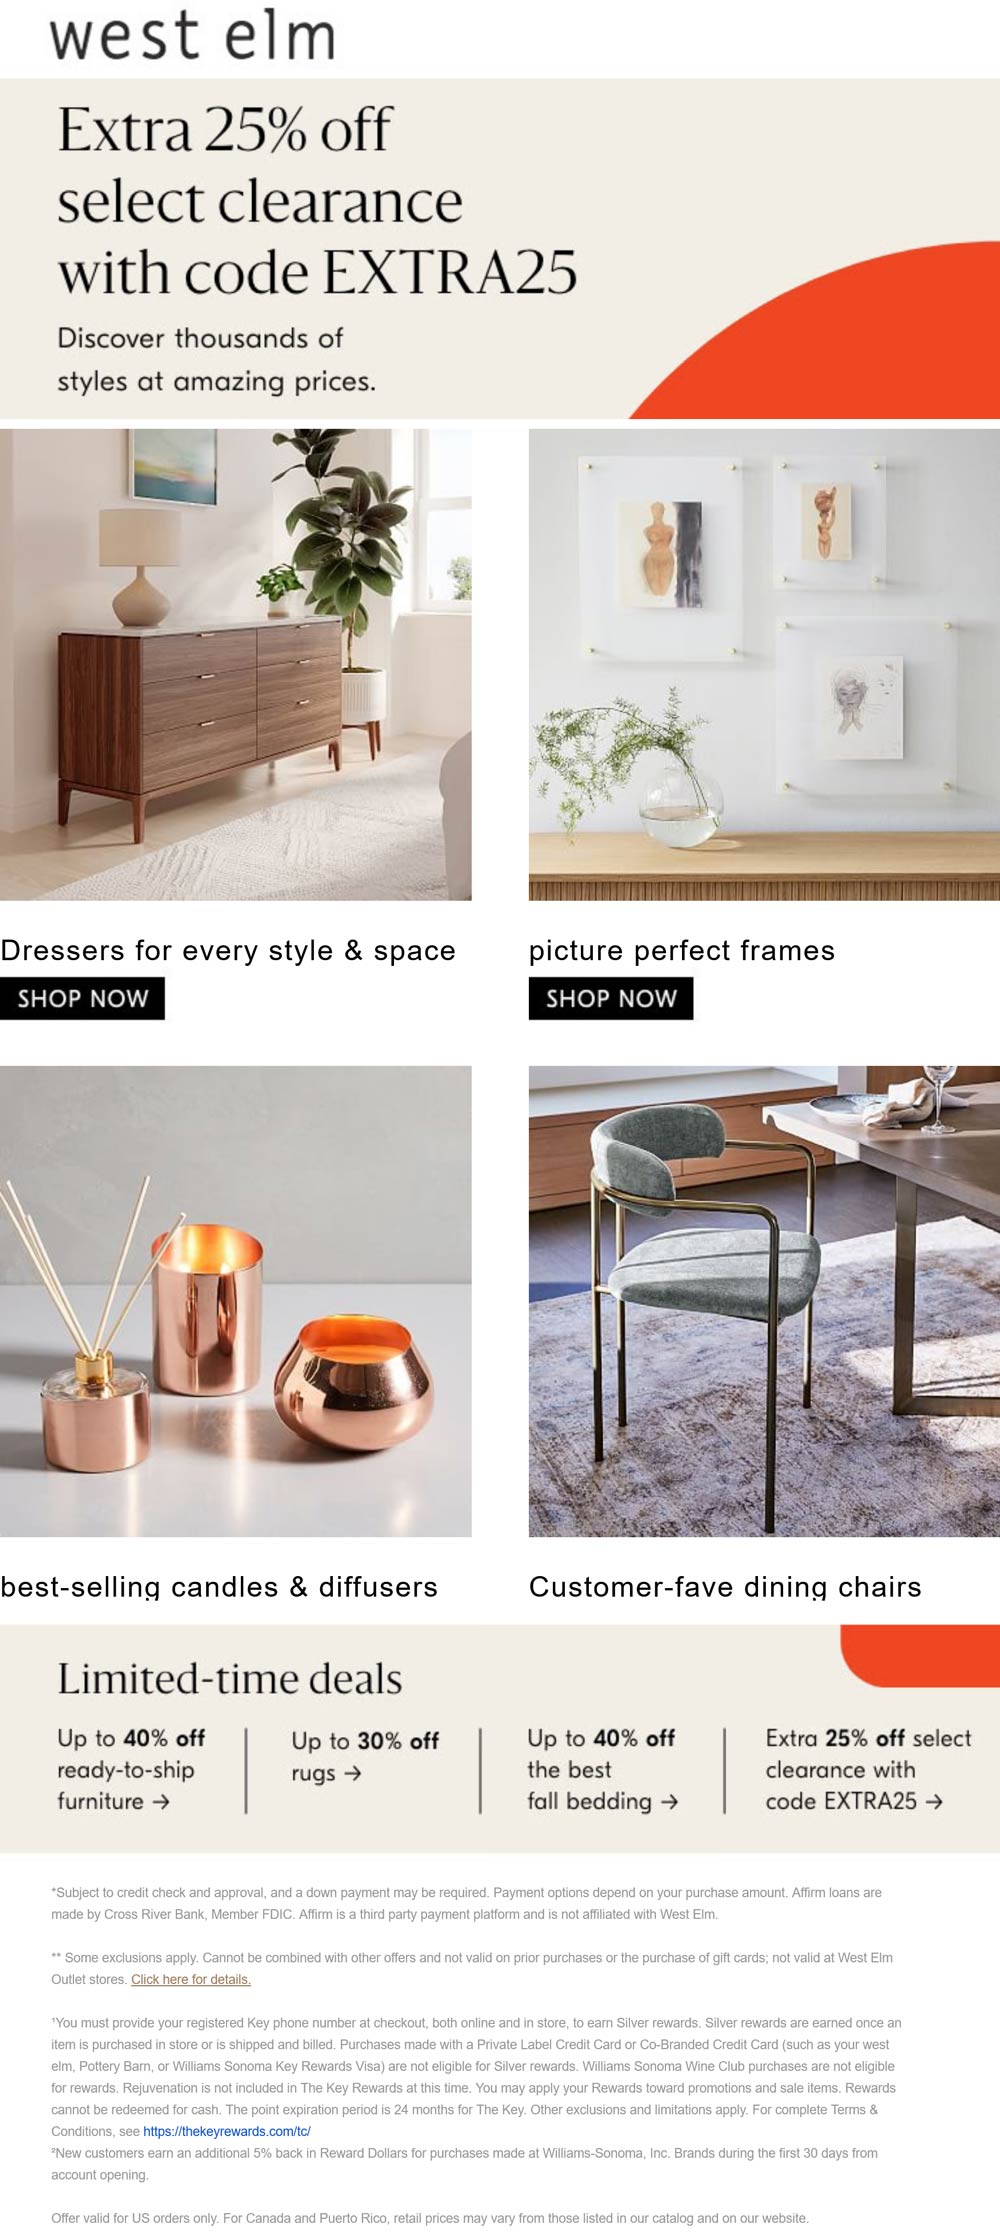 West Elm stores Coupon  Extra 25% off clearance & more at West Elm via promo code EXTRA25 #westelm 